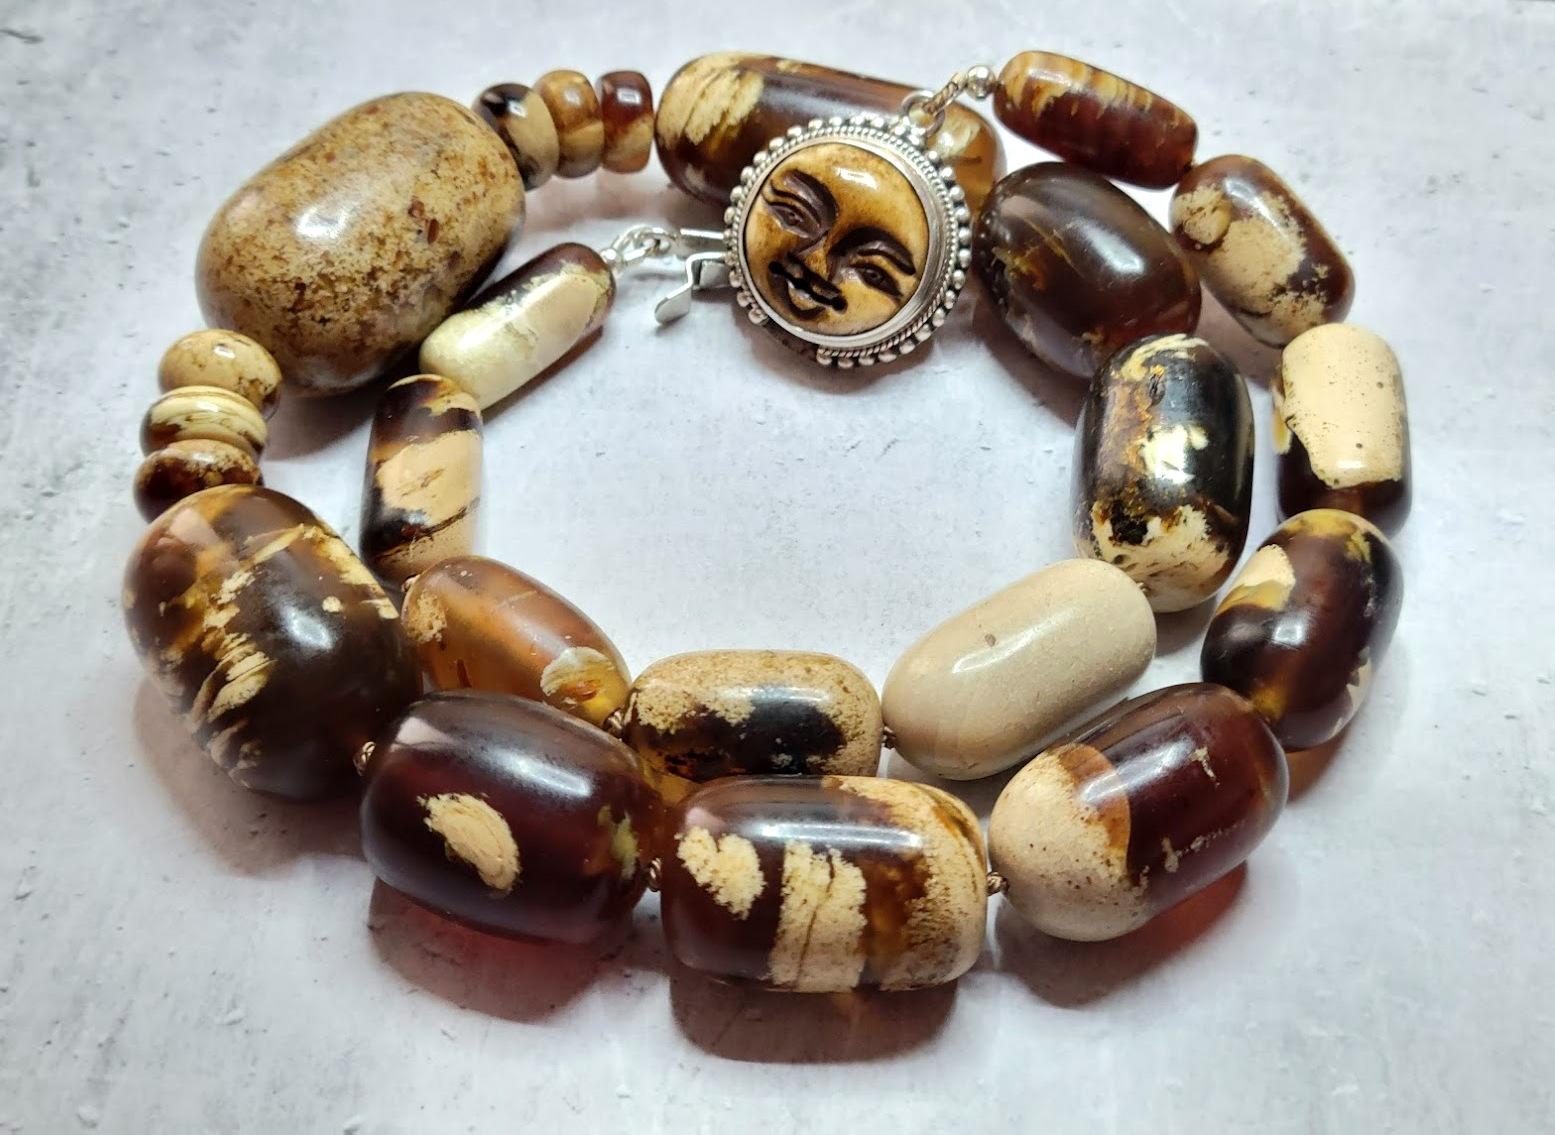 The length of the necklace is 22 inches (56 cm). The size of the huge smooth barrel beads varies from 22 mm to 37 mm.
The color of beads varies from light beige to saturated brown. In bright sunlight, the Sumatran amber has a shade of blue.
The